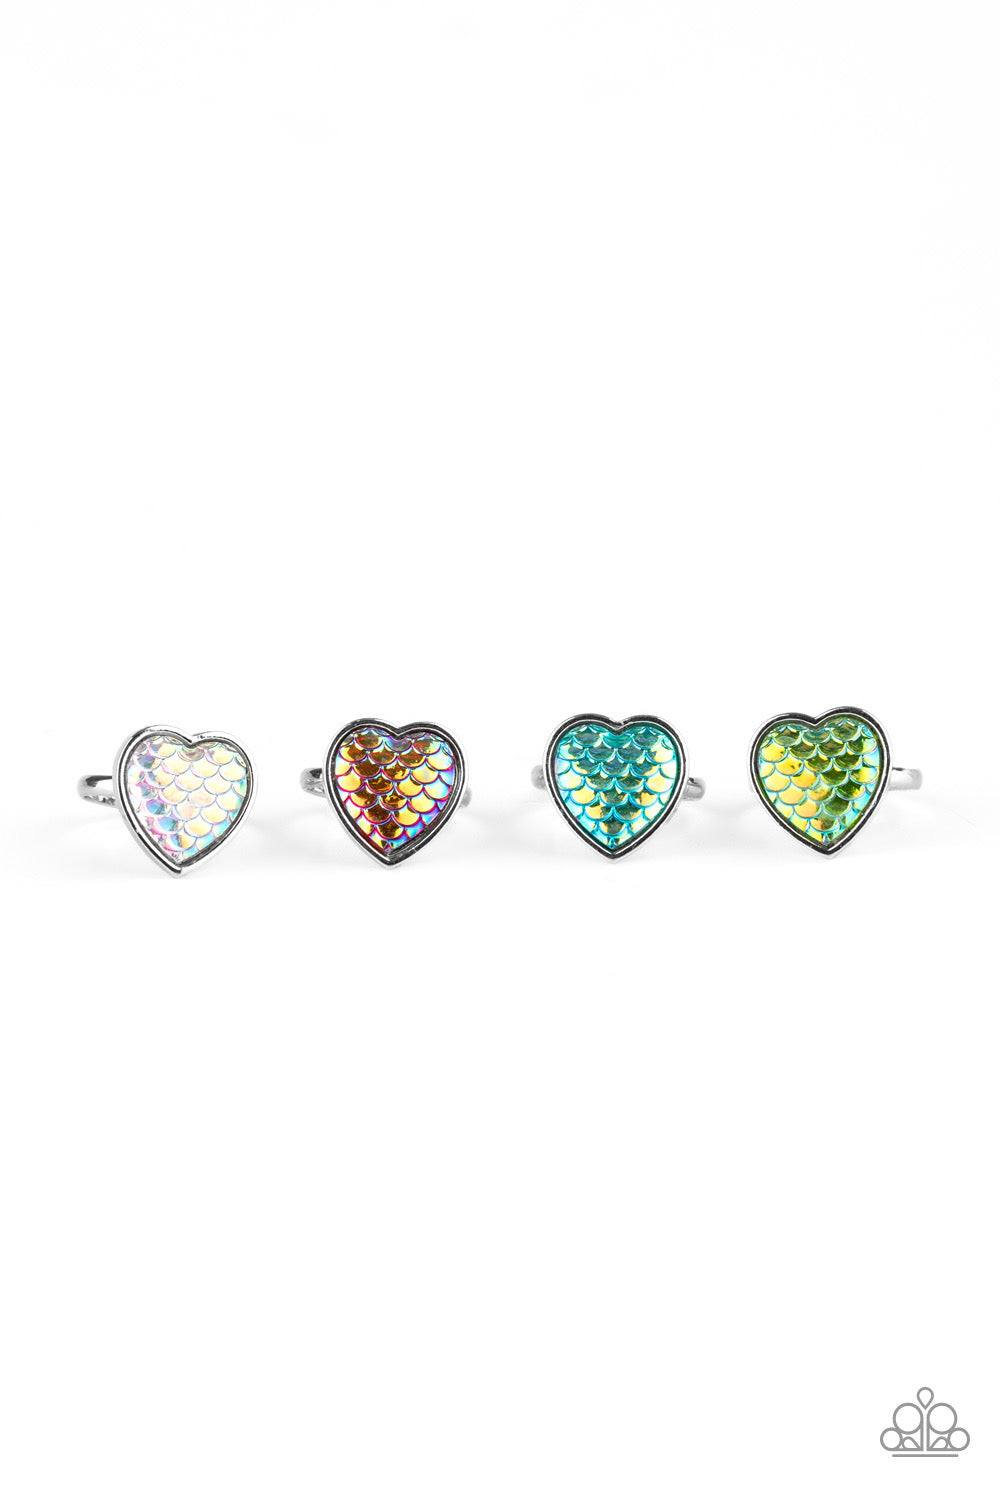 Paparazzi 💜 STARLET SHIMMER 💜 Mermaid Tail Heart Rings -- 5 Pack